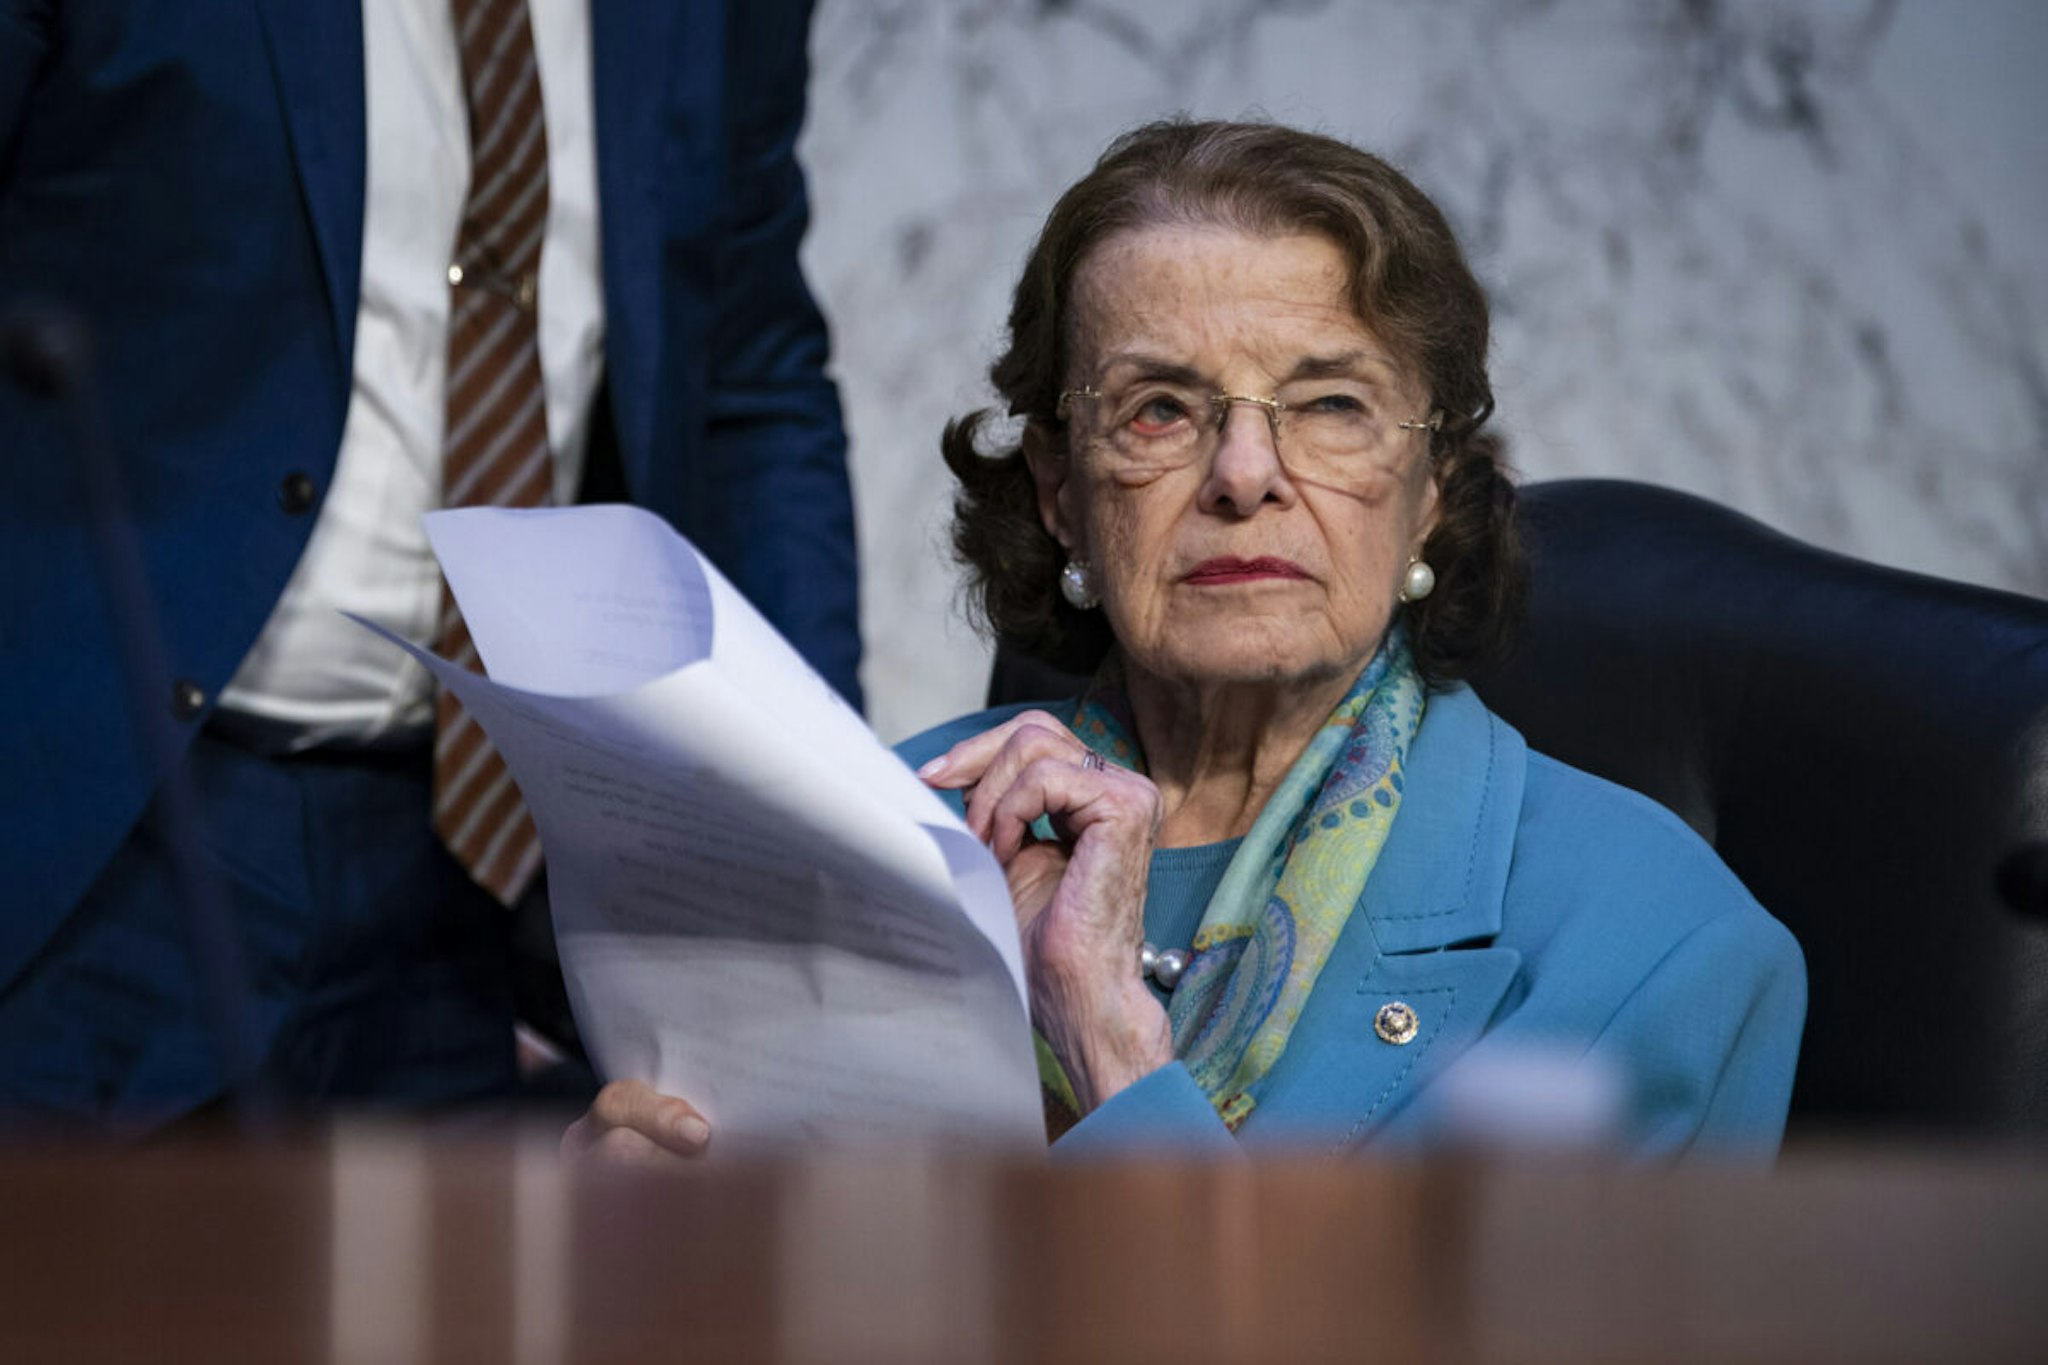 Senator Dianne Feinstein, a Democrat from California, during a Senate Intelligence Committee nomination hearing for National Security Agency (NSA) director nominee Timothy Haugh in Washington, DC, US, on Wednesday, July 12, 2023.